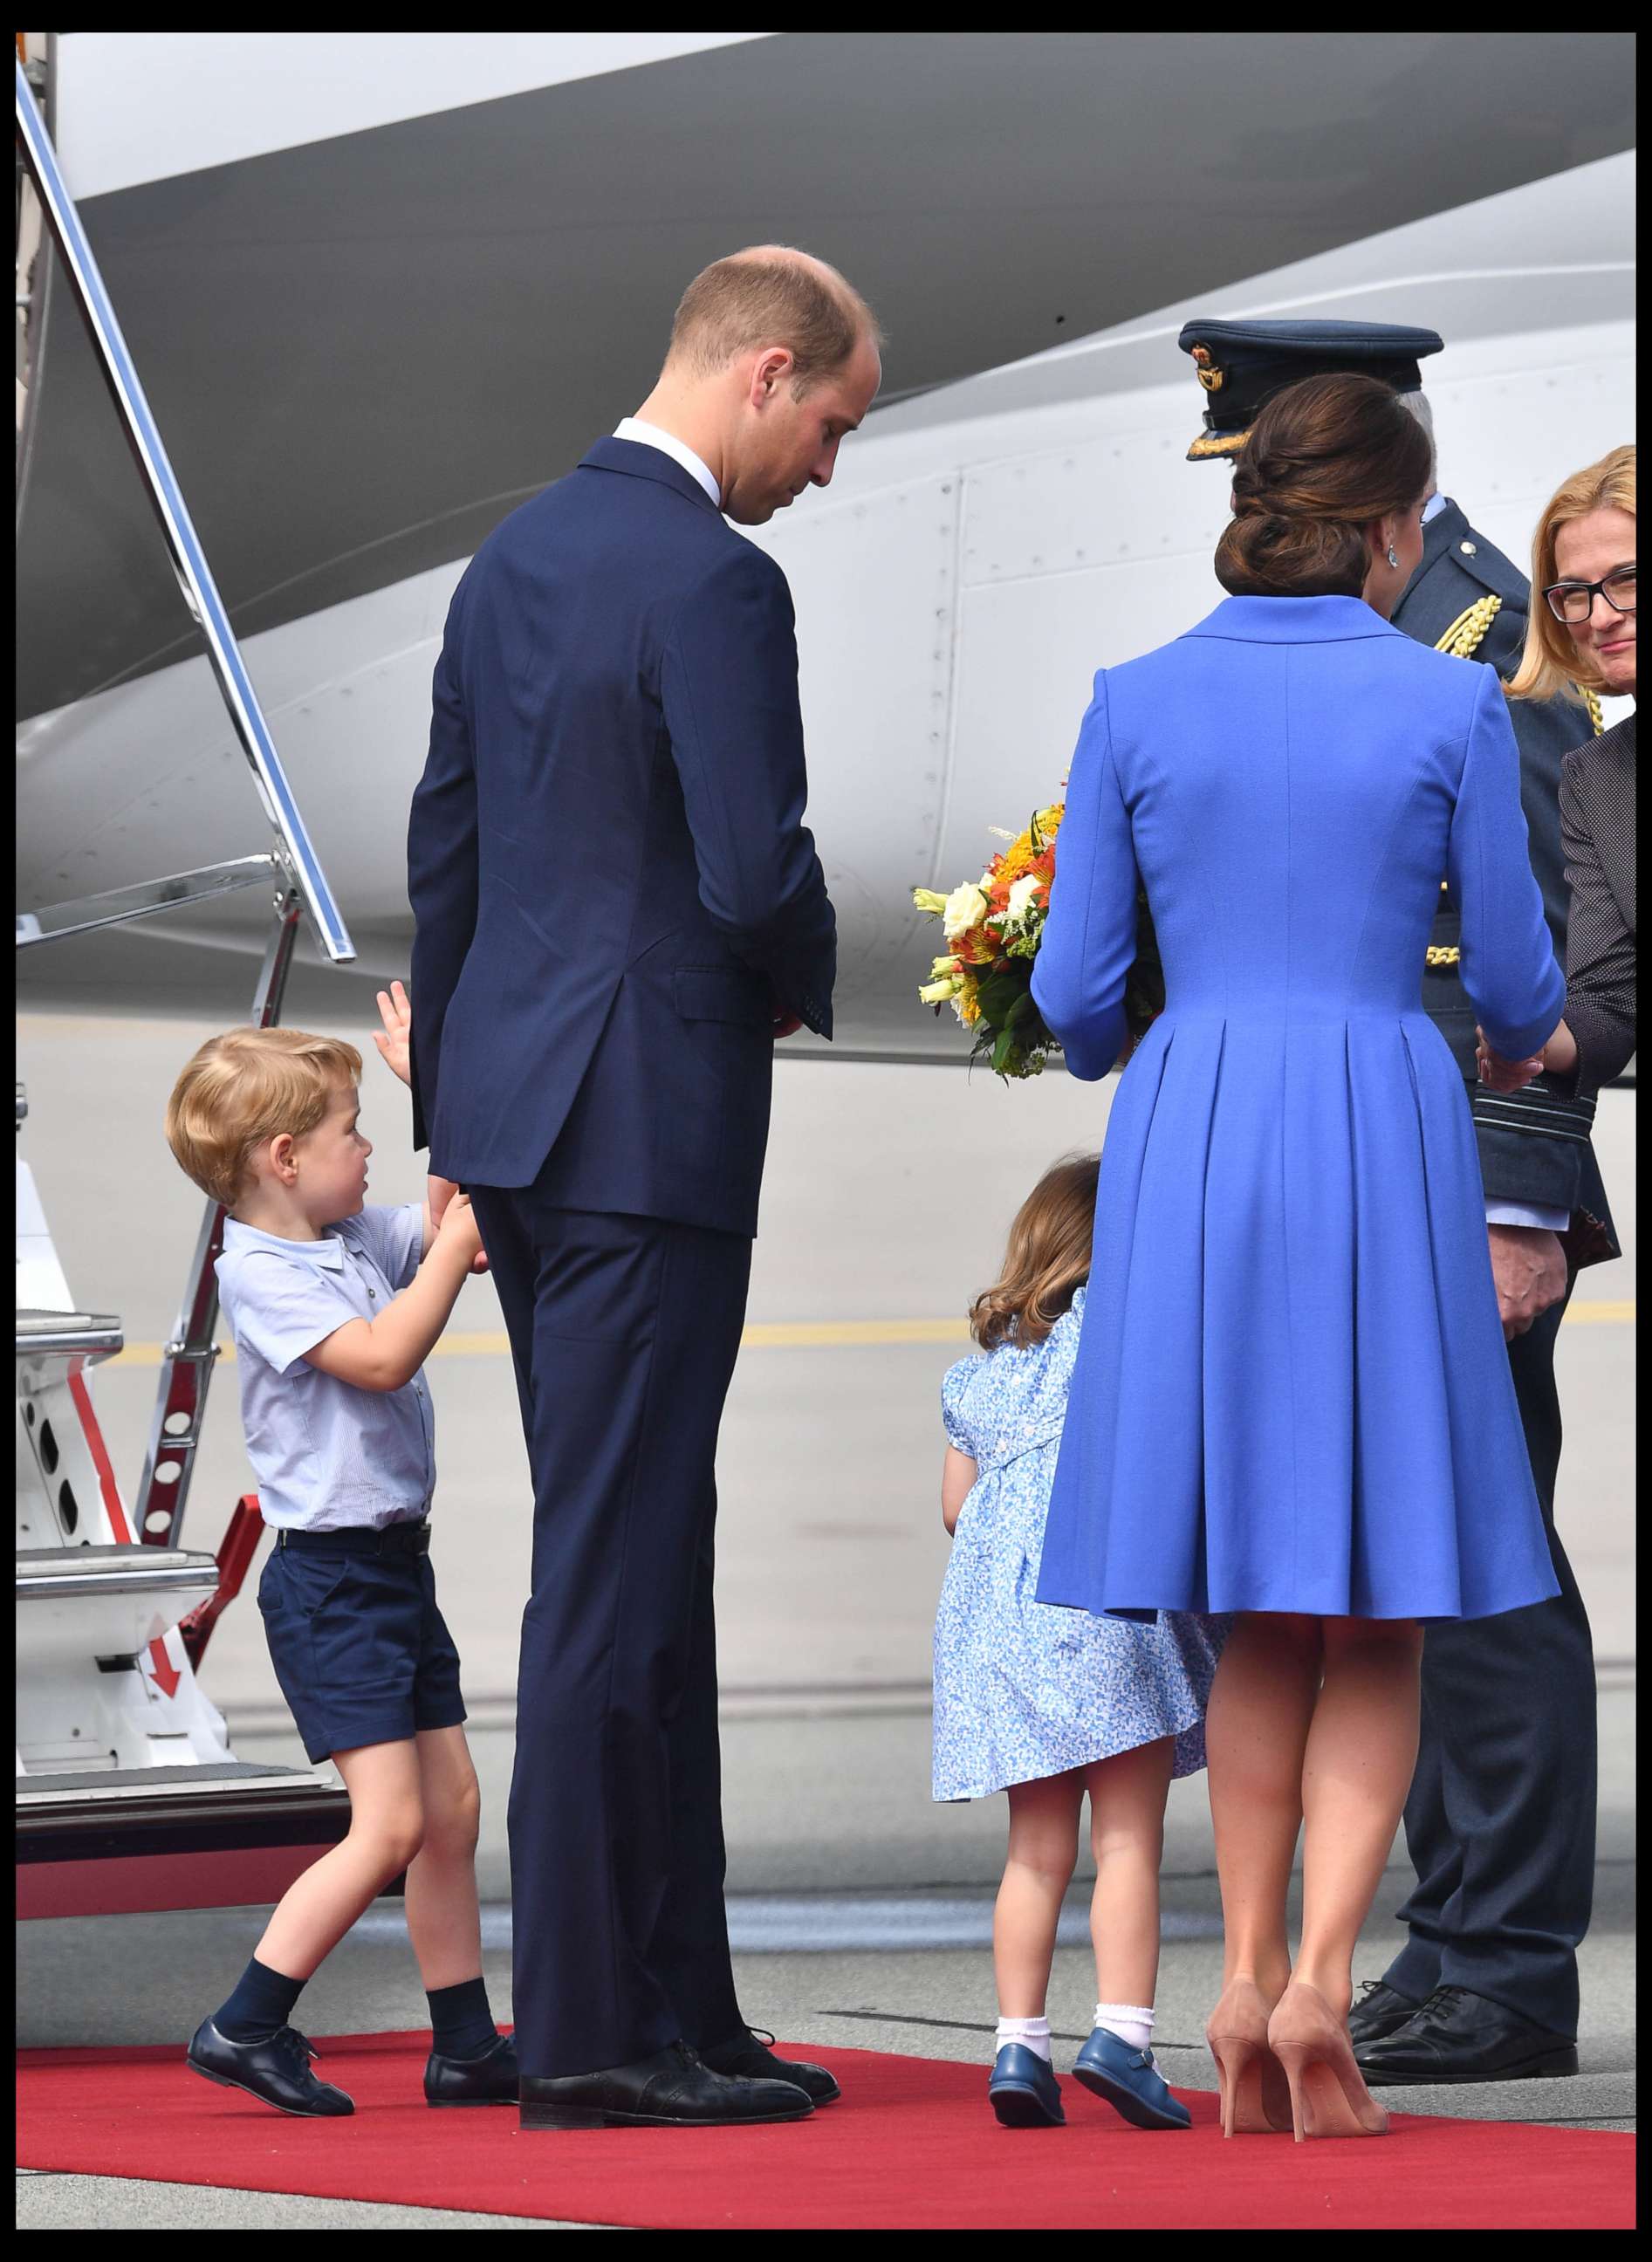 PHOTO: Prince William, Catherine The Duchess of Cambridge with their children Prince George and Princess Charlotte depart Warsaw airport in Poland after a three day visit, July 19, 2017.